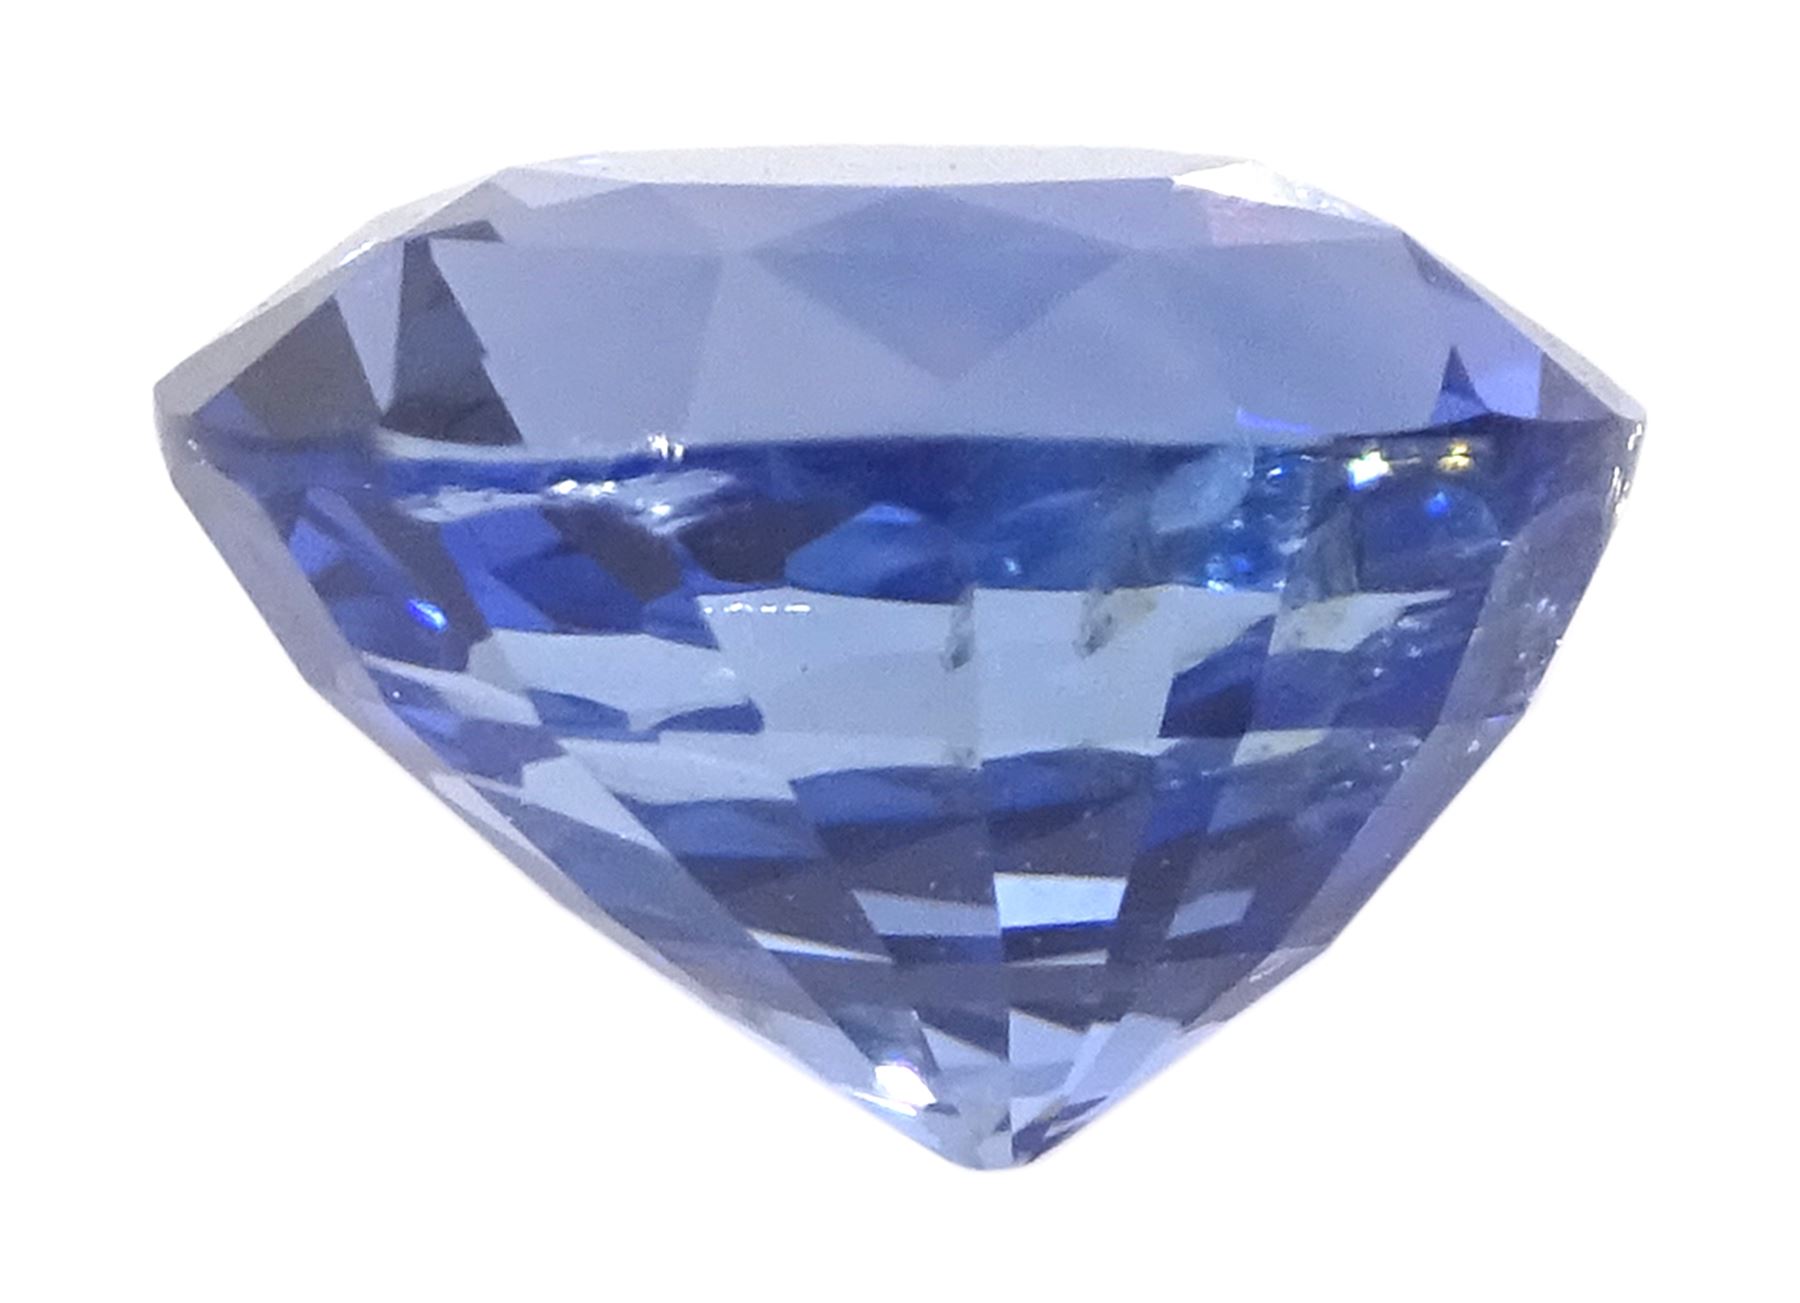 Loose oval mixed cut unheated pastel cornflower blue sapphire of 2.75 carat - Image 2 of 4